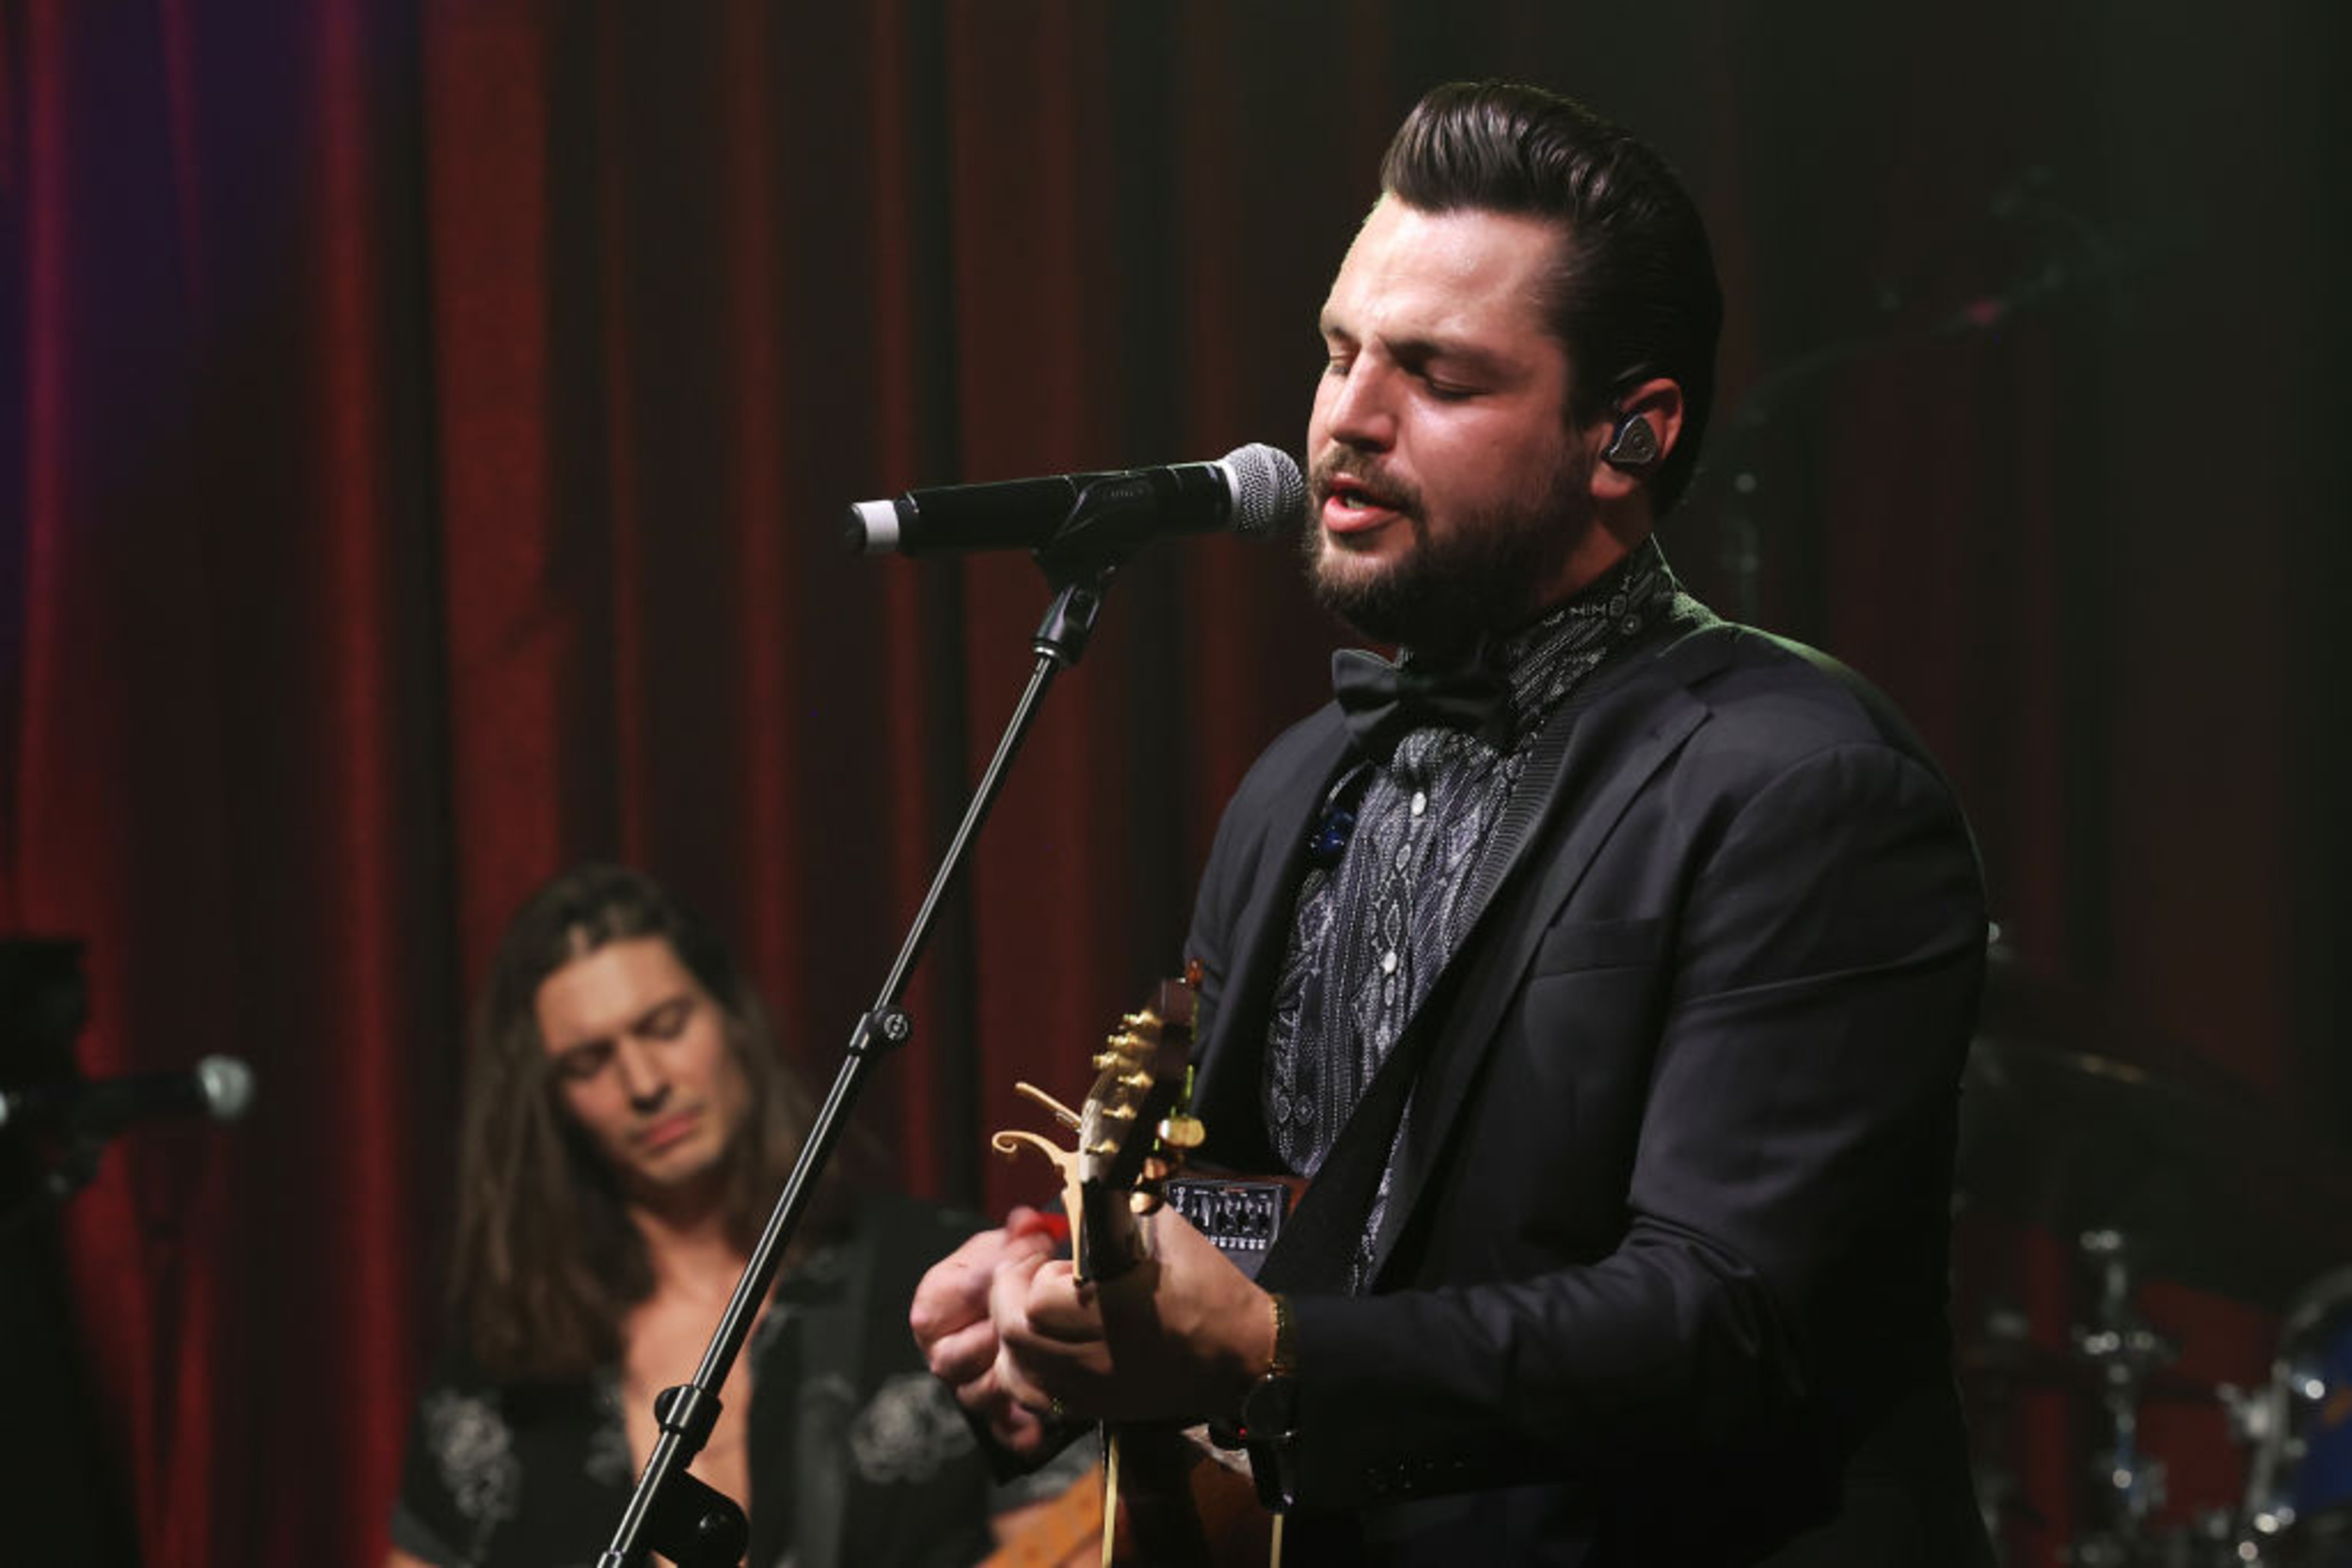 <p>The winner of the nineteenth season of "American Idol," Chayce Beckham has already scored a Platinum hit with 2021's "23," but he's not stopping there. In 2023, Beckham returned with a great new single, "Til The Day I Die," and he's headed out on tour with Luke Bryan in 2024. </p><p>You may also like: <a href='https://www.yardbarker.com/entertainment/articles/20_sci_fi_series_that_need_a_tv_adaptation/s1__40217160'>20 sci-fi series that need a TV adaptation</a></p>